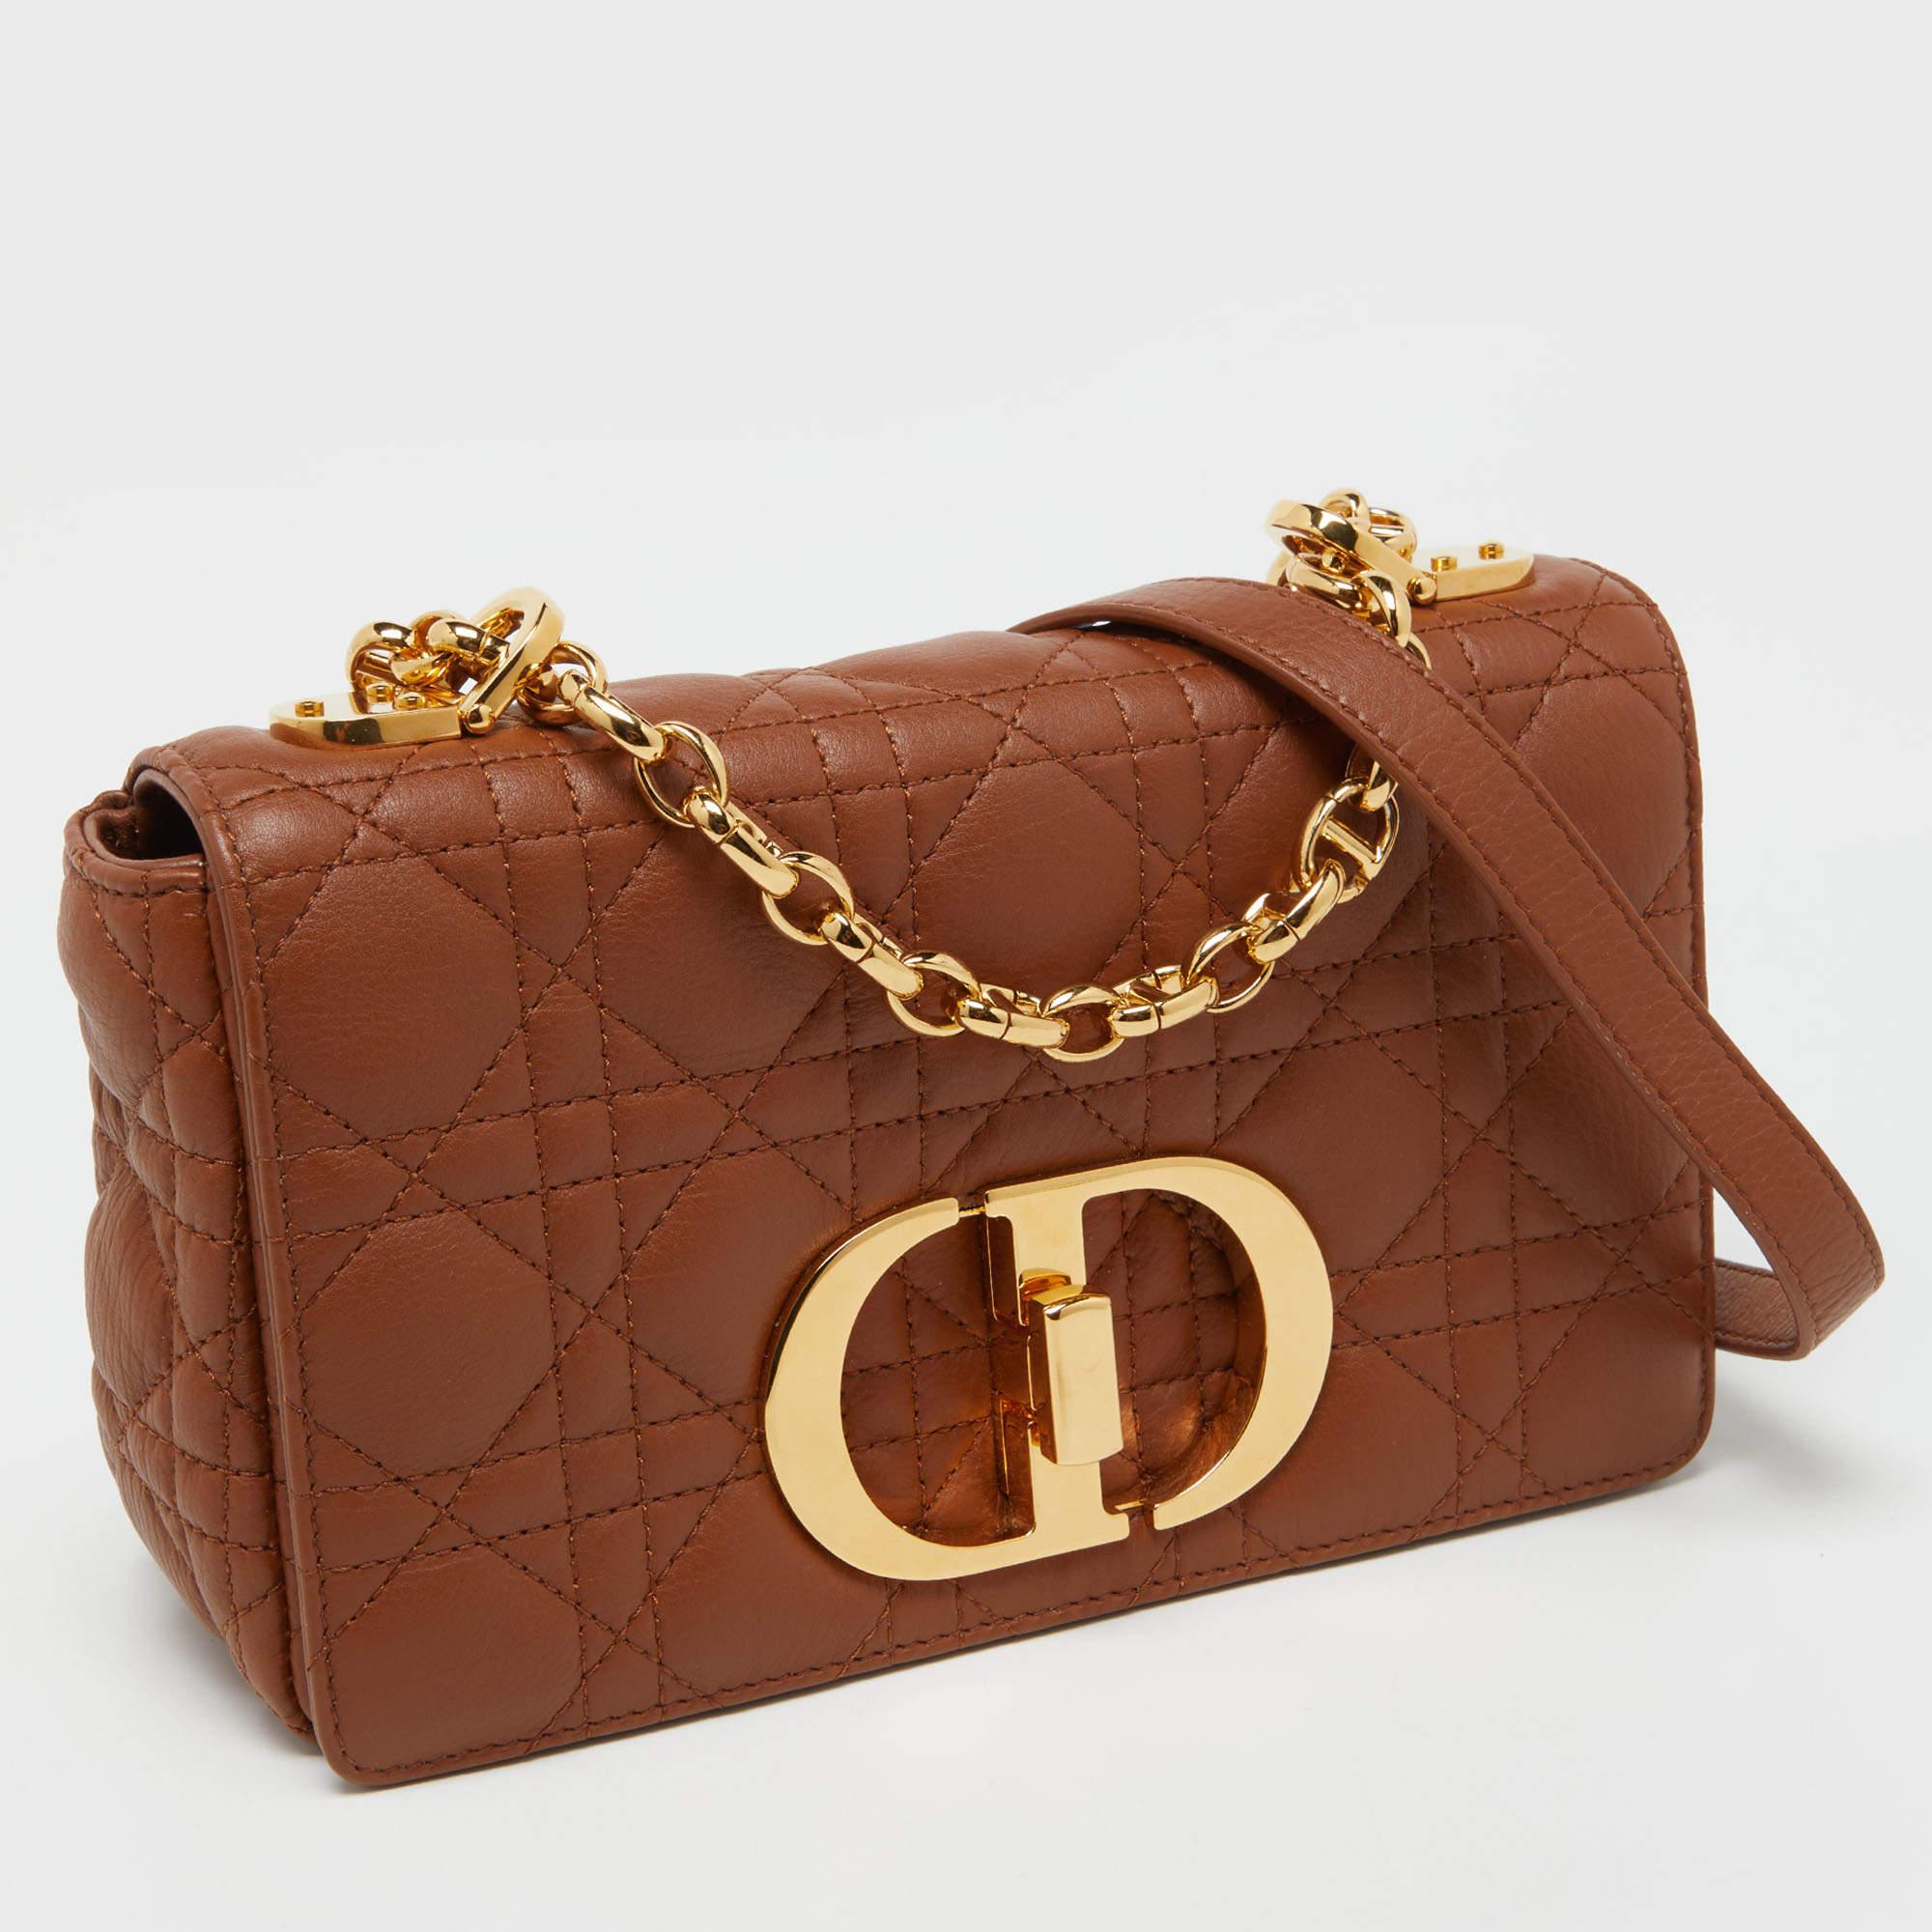 Dior Brown Cannage Leather Small Caro Shoulder Bag In Excellent Condition For Sale In Dubai, Al Qouz 2